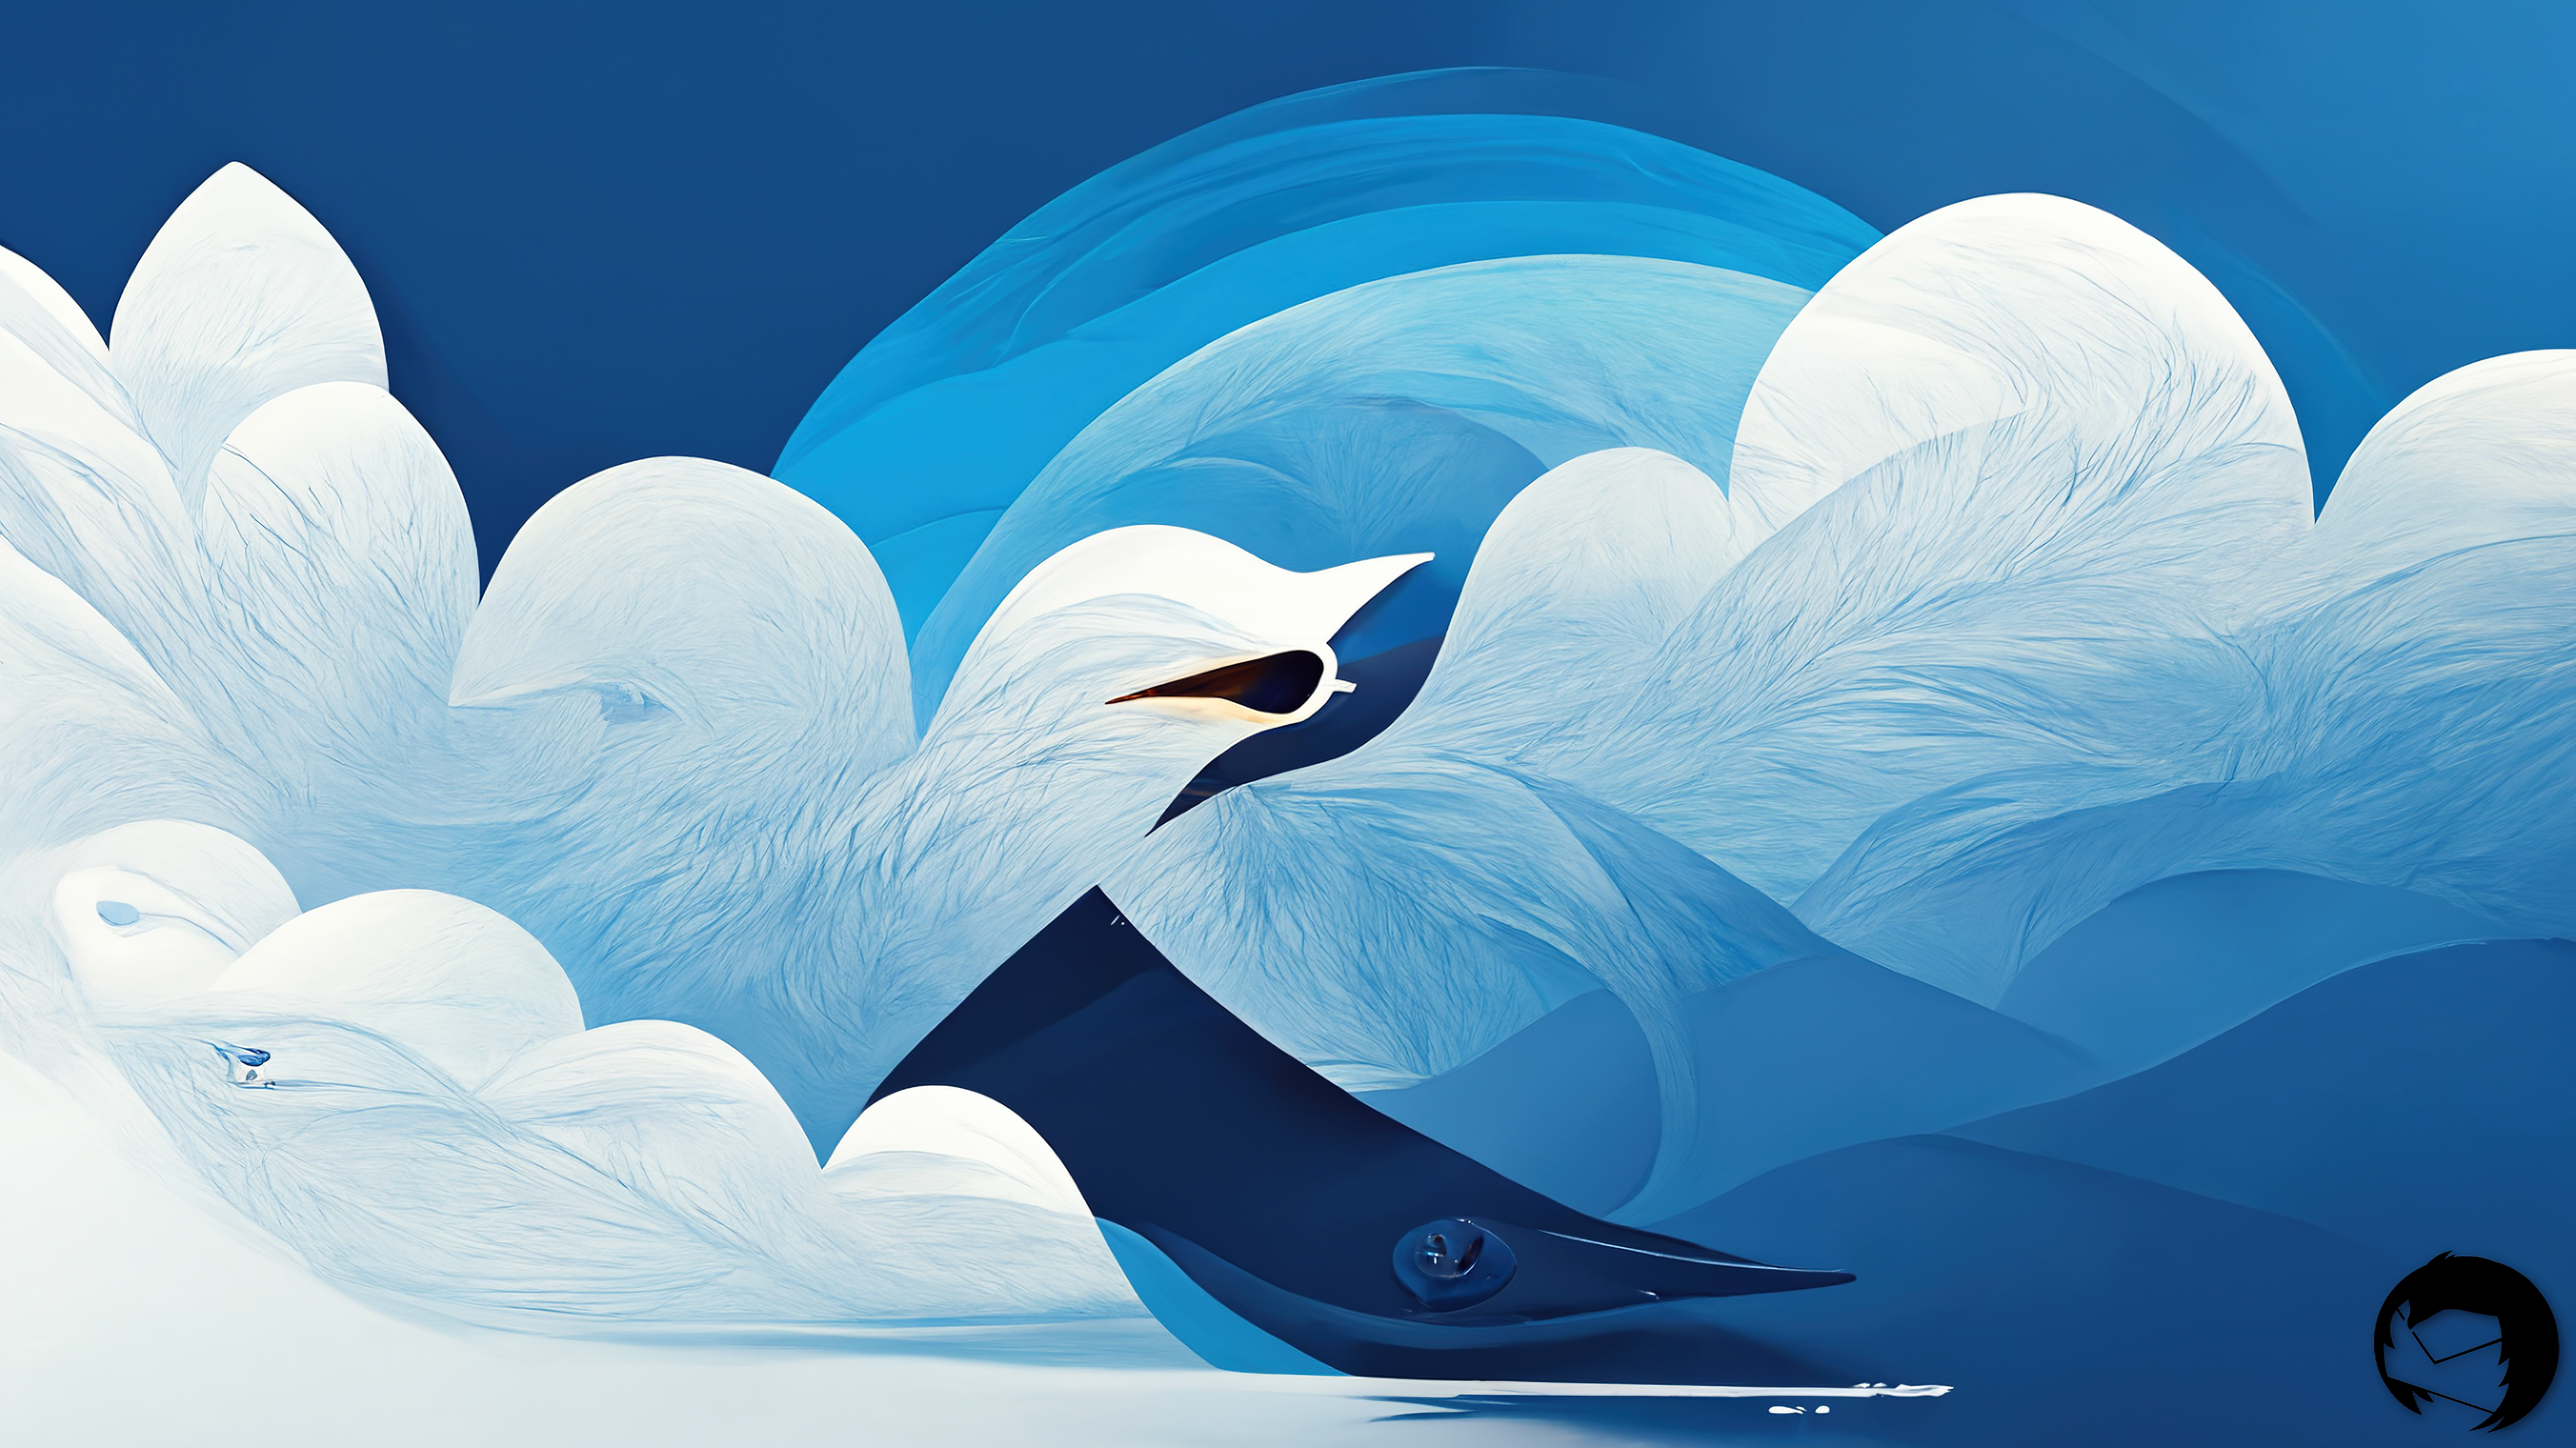 We Asked AI To Create These Beautiful Thunderbird Wallpapers